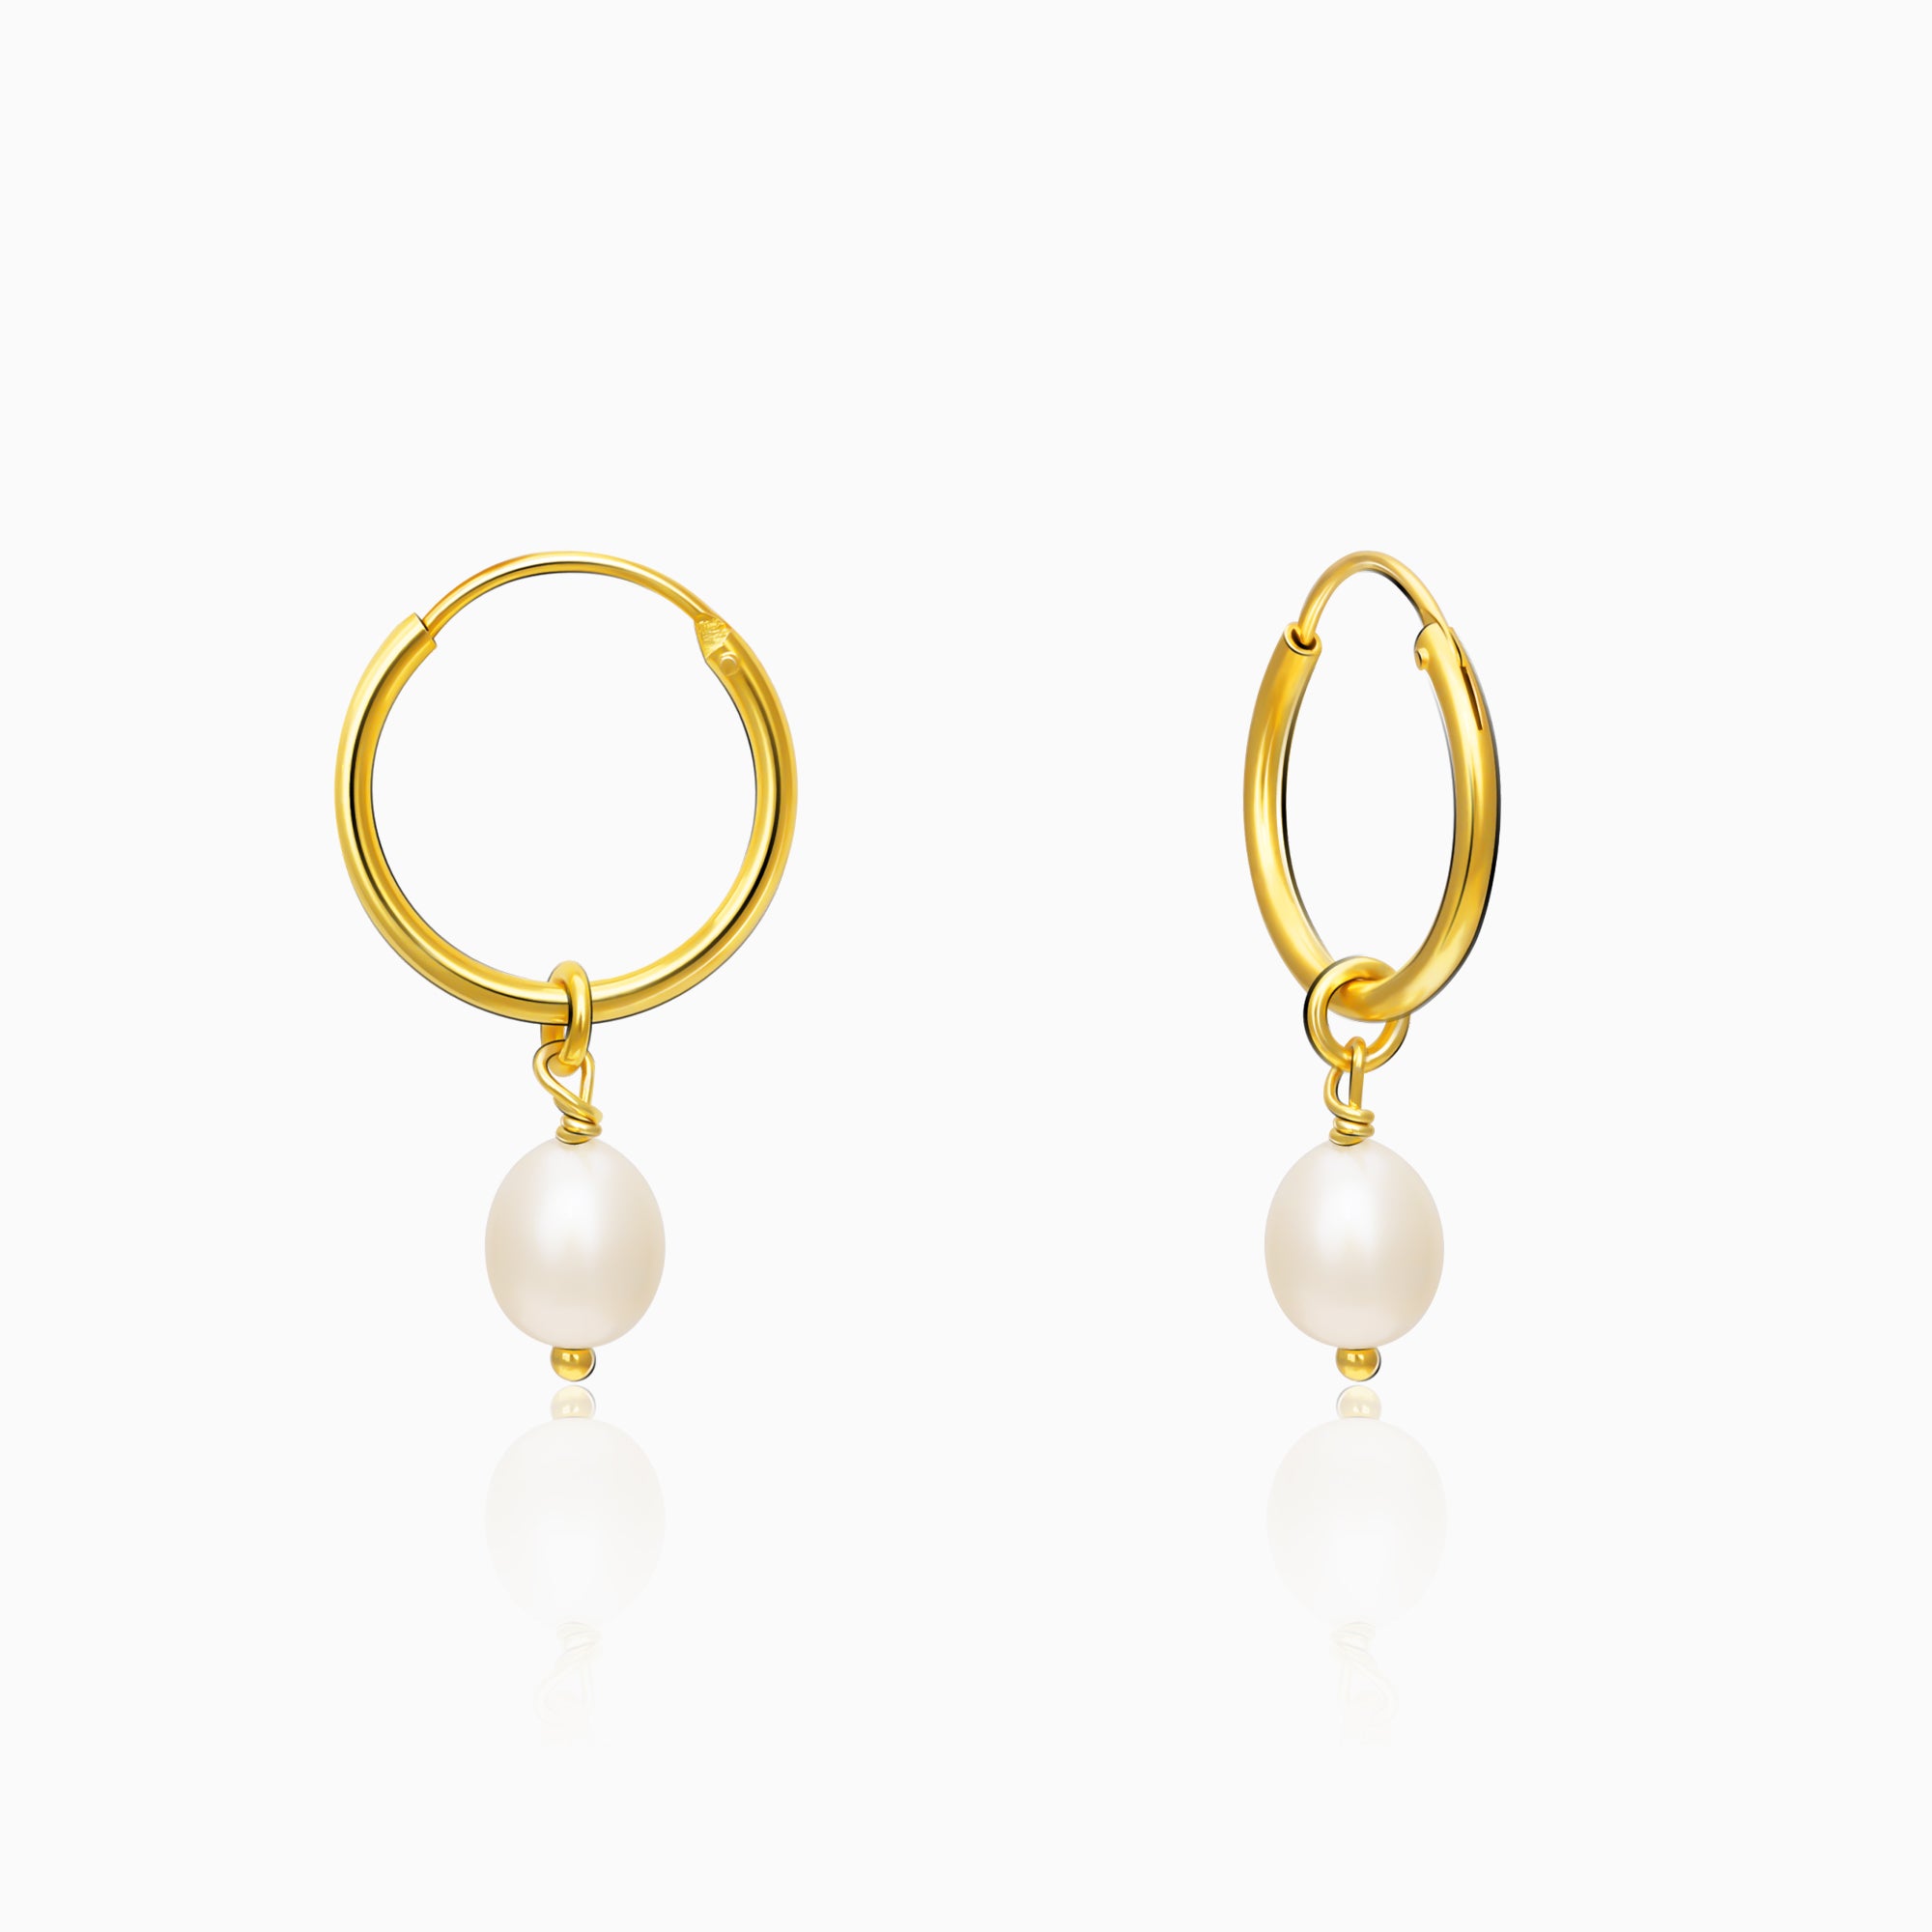 Details more than 243 gold and pearl drop earrings super hot